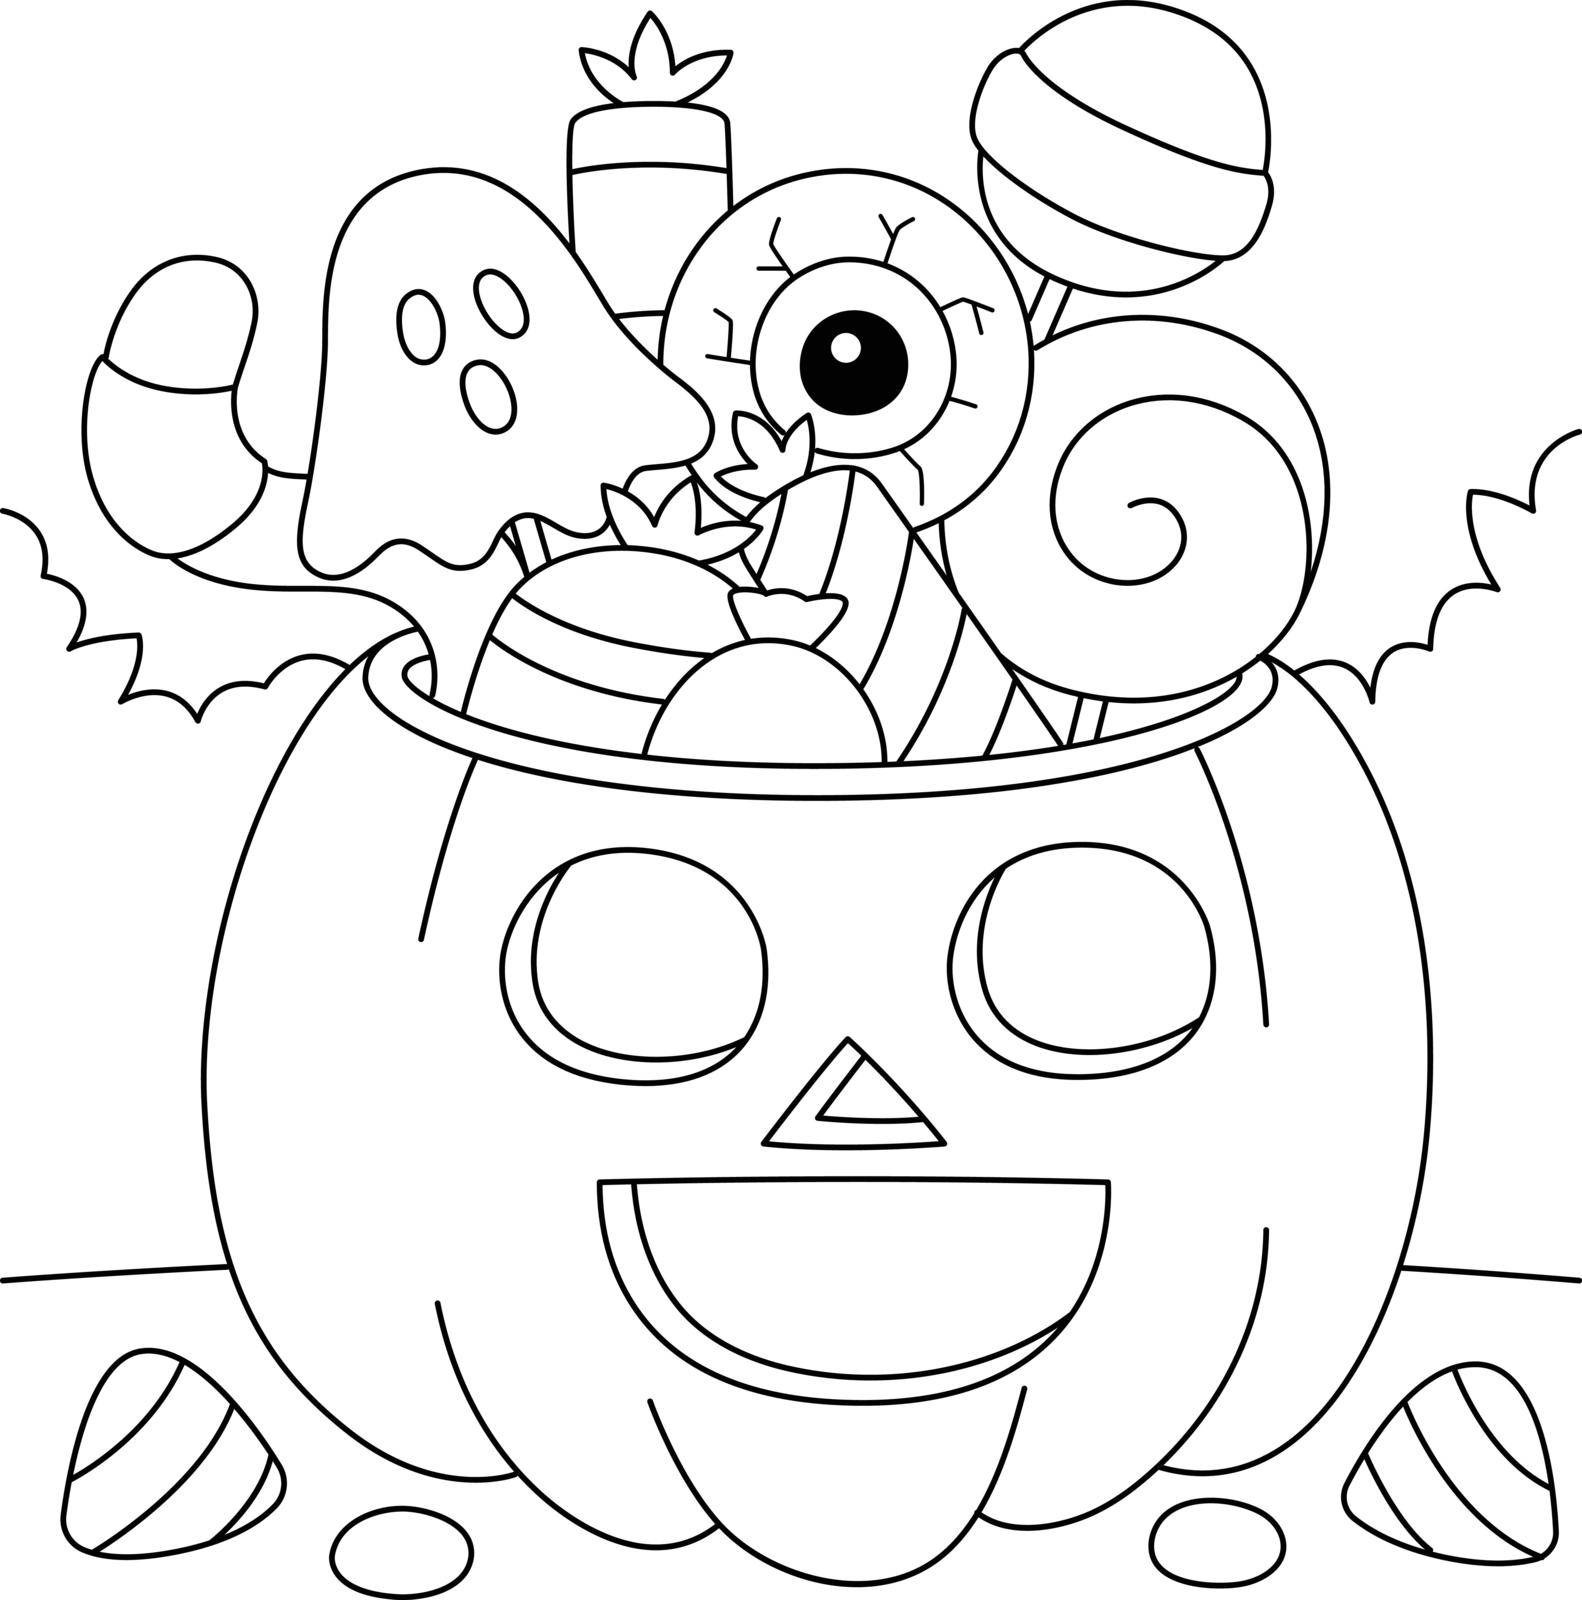 A cute and funny coloring page of a trick-or-treat pumpkin. Provides hours of coloring fun for children. To color, this page is very easy. Suitable for little kids and toddlers.